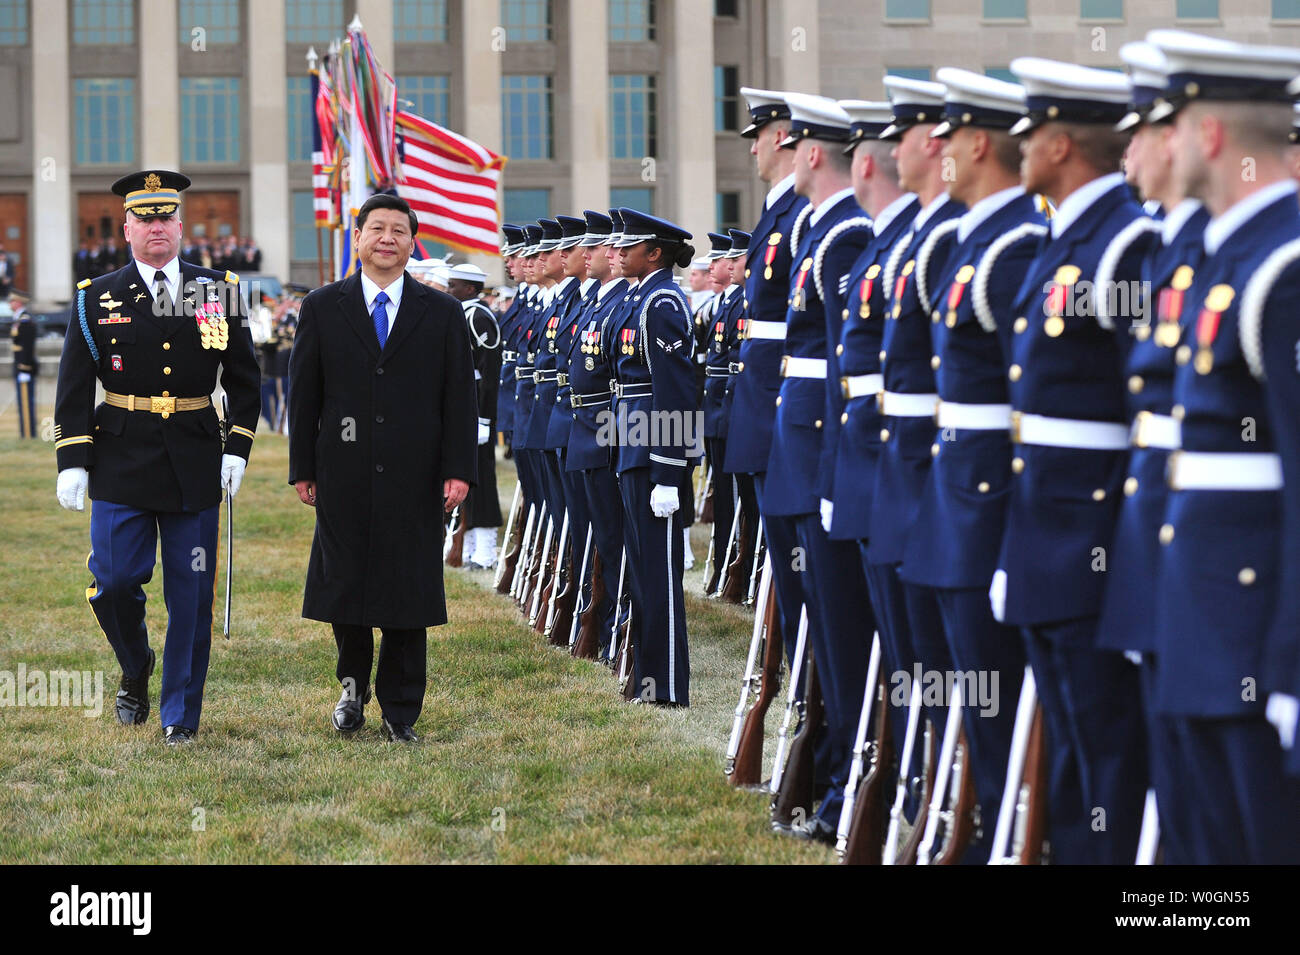 Chinese Vice President Xi Jinping participates in a full honors arrival ceremony outside the Pentagon in Arlington, Virginia on February 14, 2012.  UPI/Kevin Dietsch Stock Photo